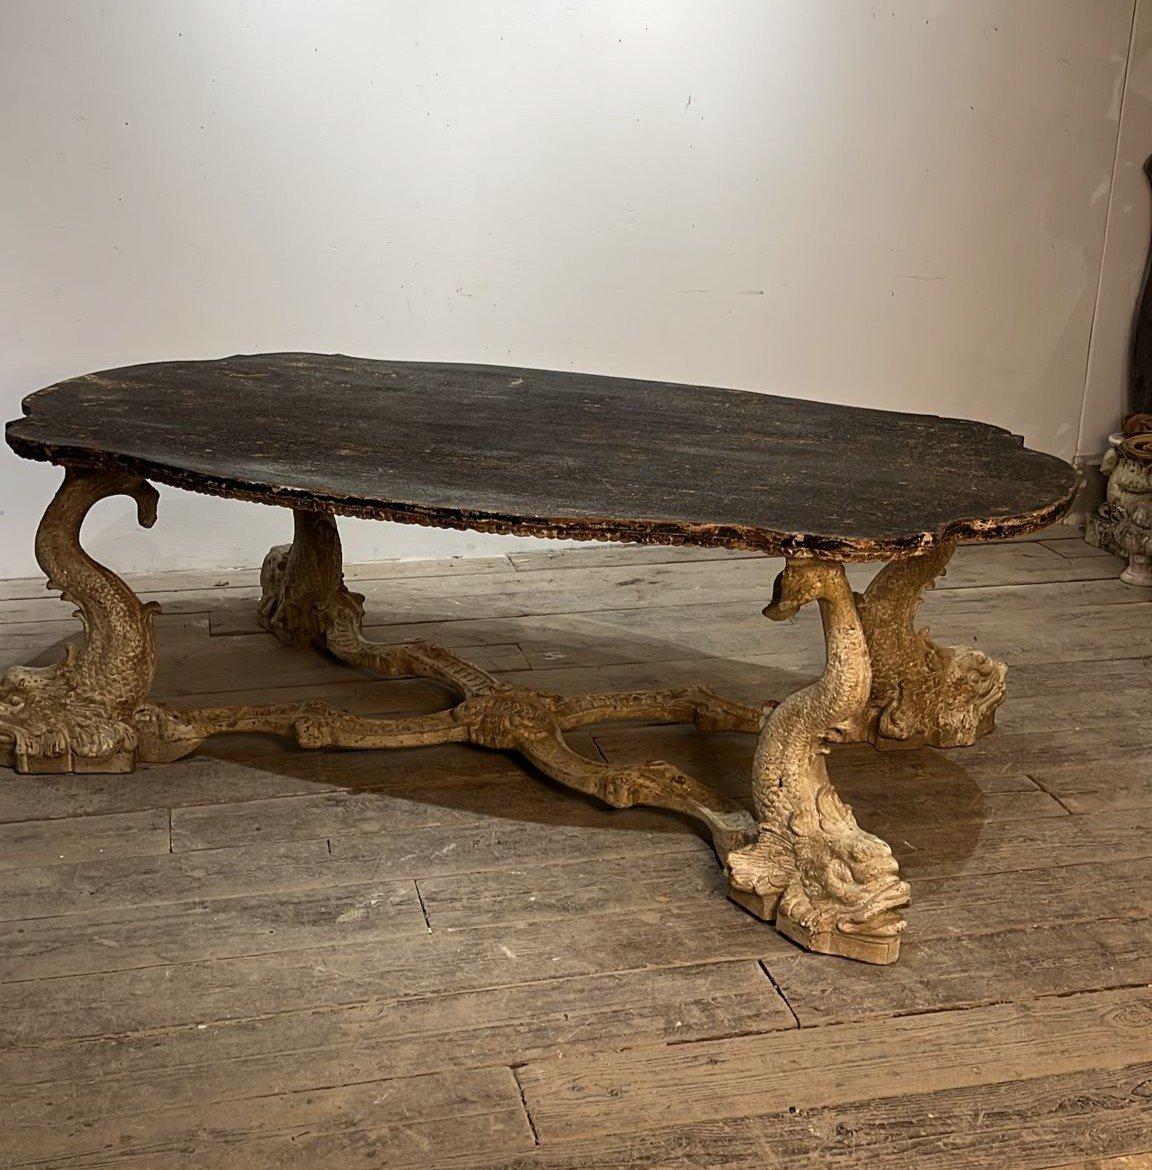 LARGE ITALIAN-VENICE TABLE OF THE XIX CENTURY
ELEGANT ITALIAN-VENICE TABLE MADE OF CARVED WOOD AND WITH THE LEGS REPRESENTING 4 DOLPHINS. VERY GOOD CONDITION. MEASURES: 260X150X77 CM
Good condition.